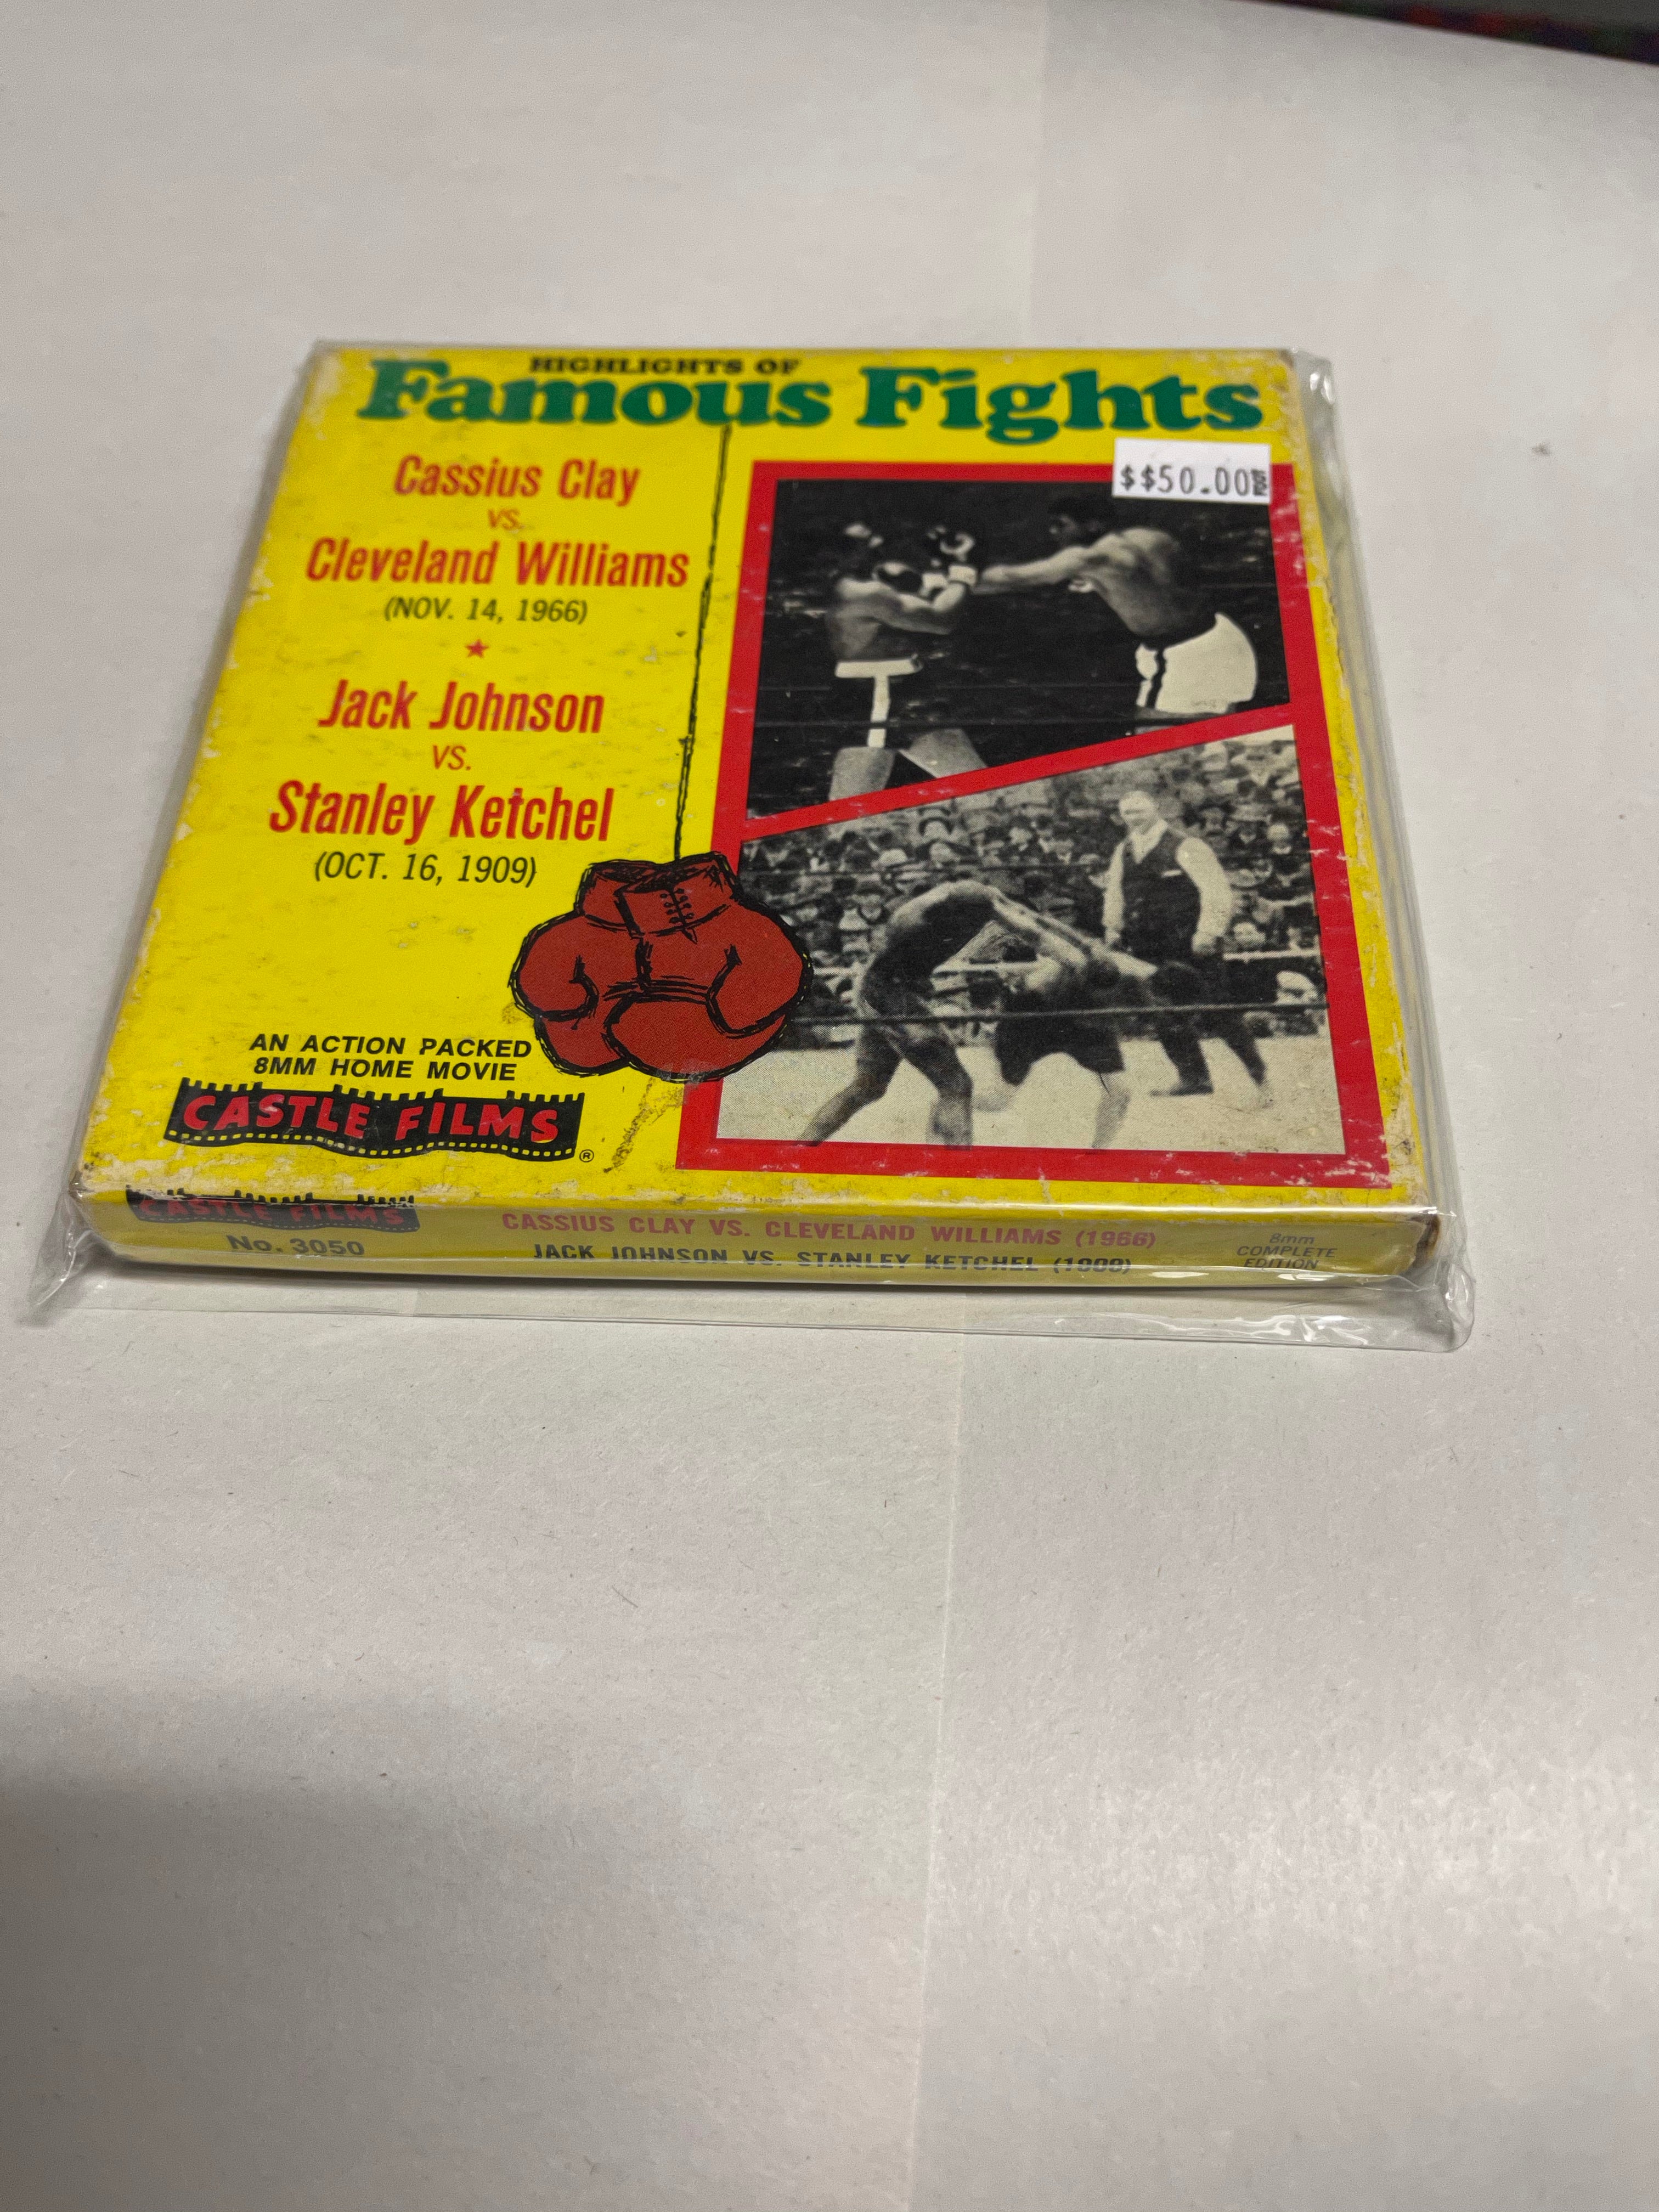 Muhammad Ali (Cassius Clay famous boxing fights on super eight film reel 1970s